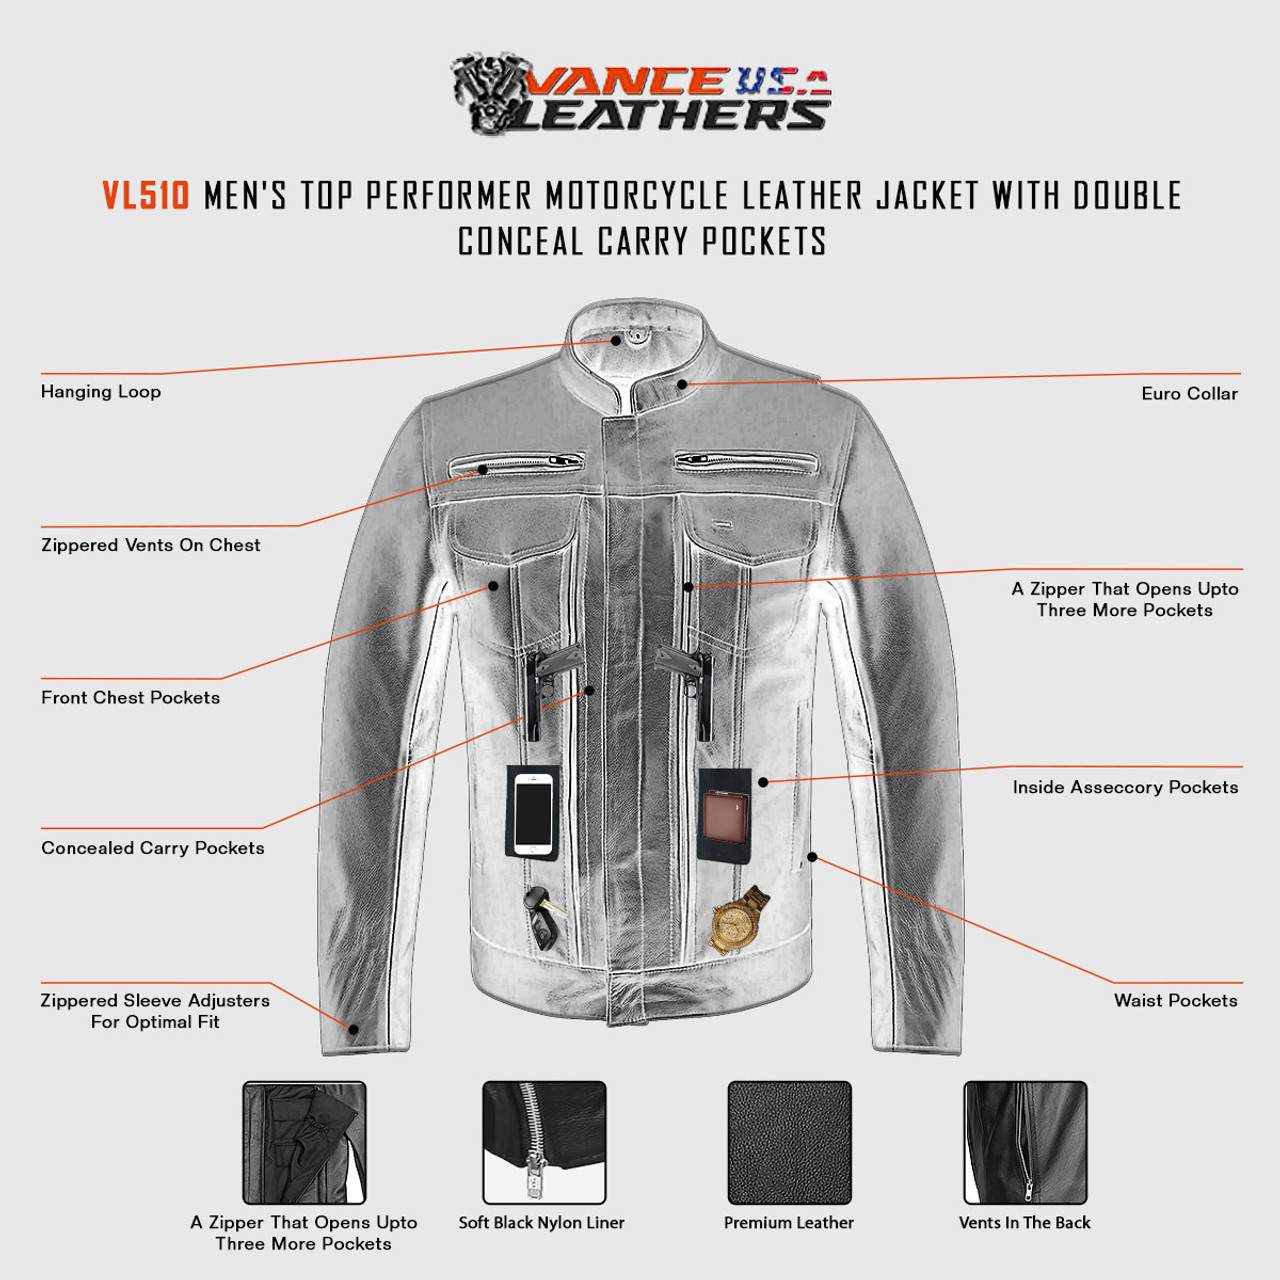 Double Conceal Carry Pockets Motorcycle Leather Jacket